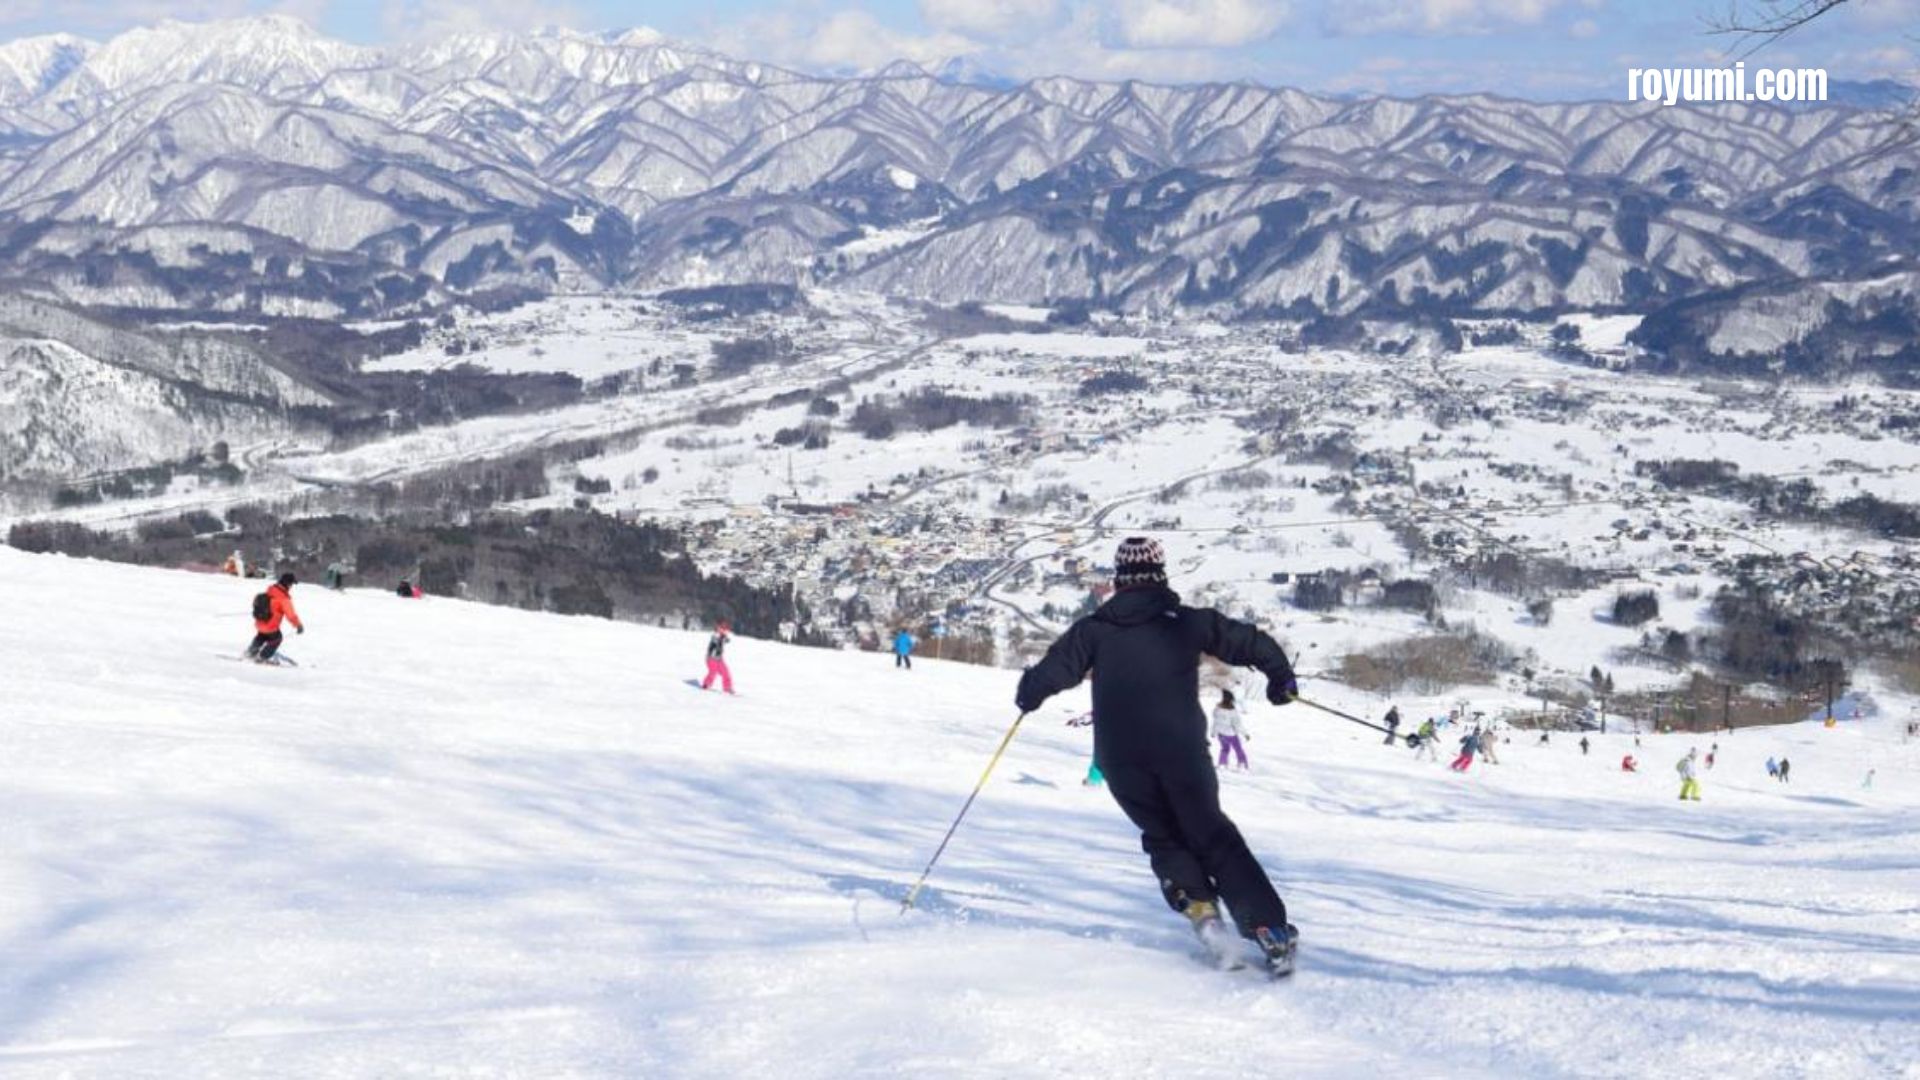 Nagano: A treasure trove of natural wonders, traditions and hospitality in the heart of Japan